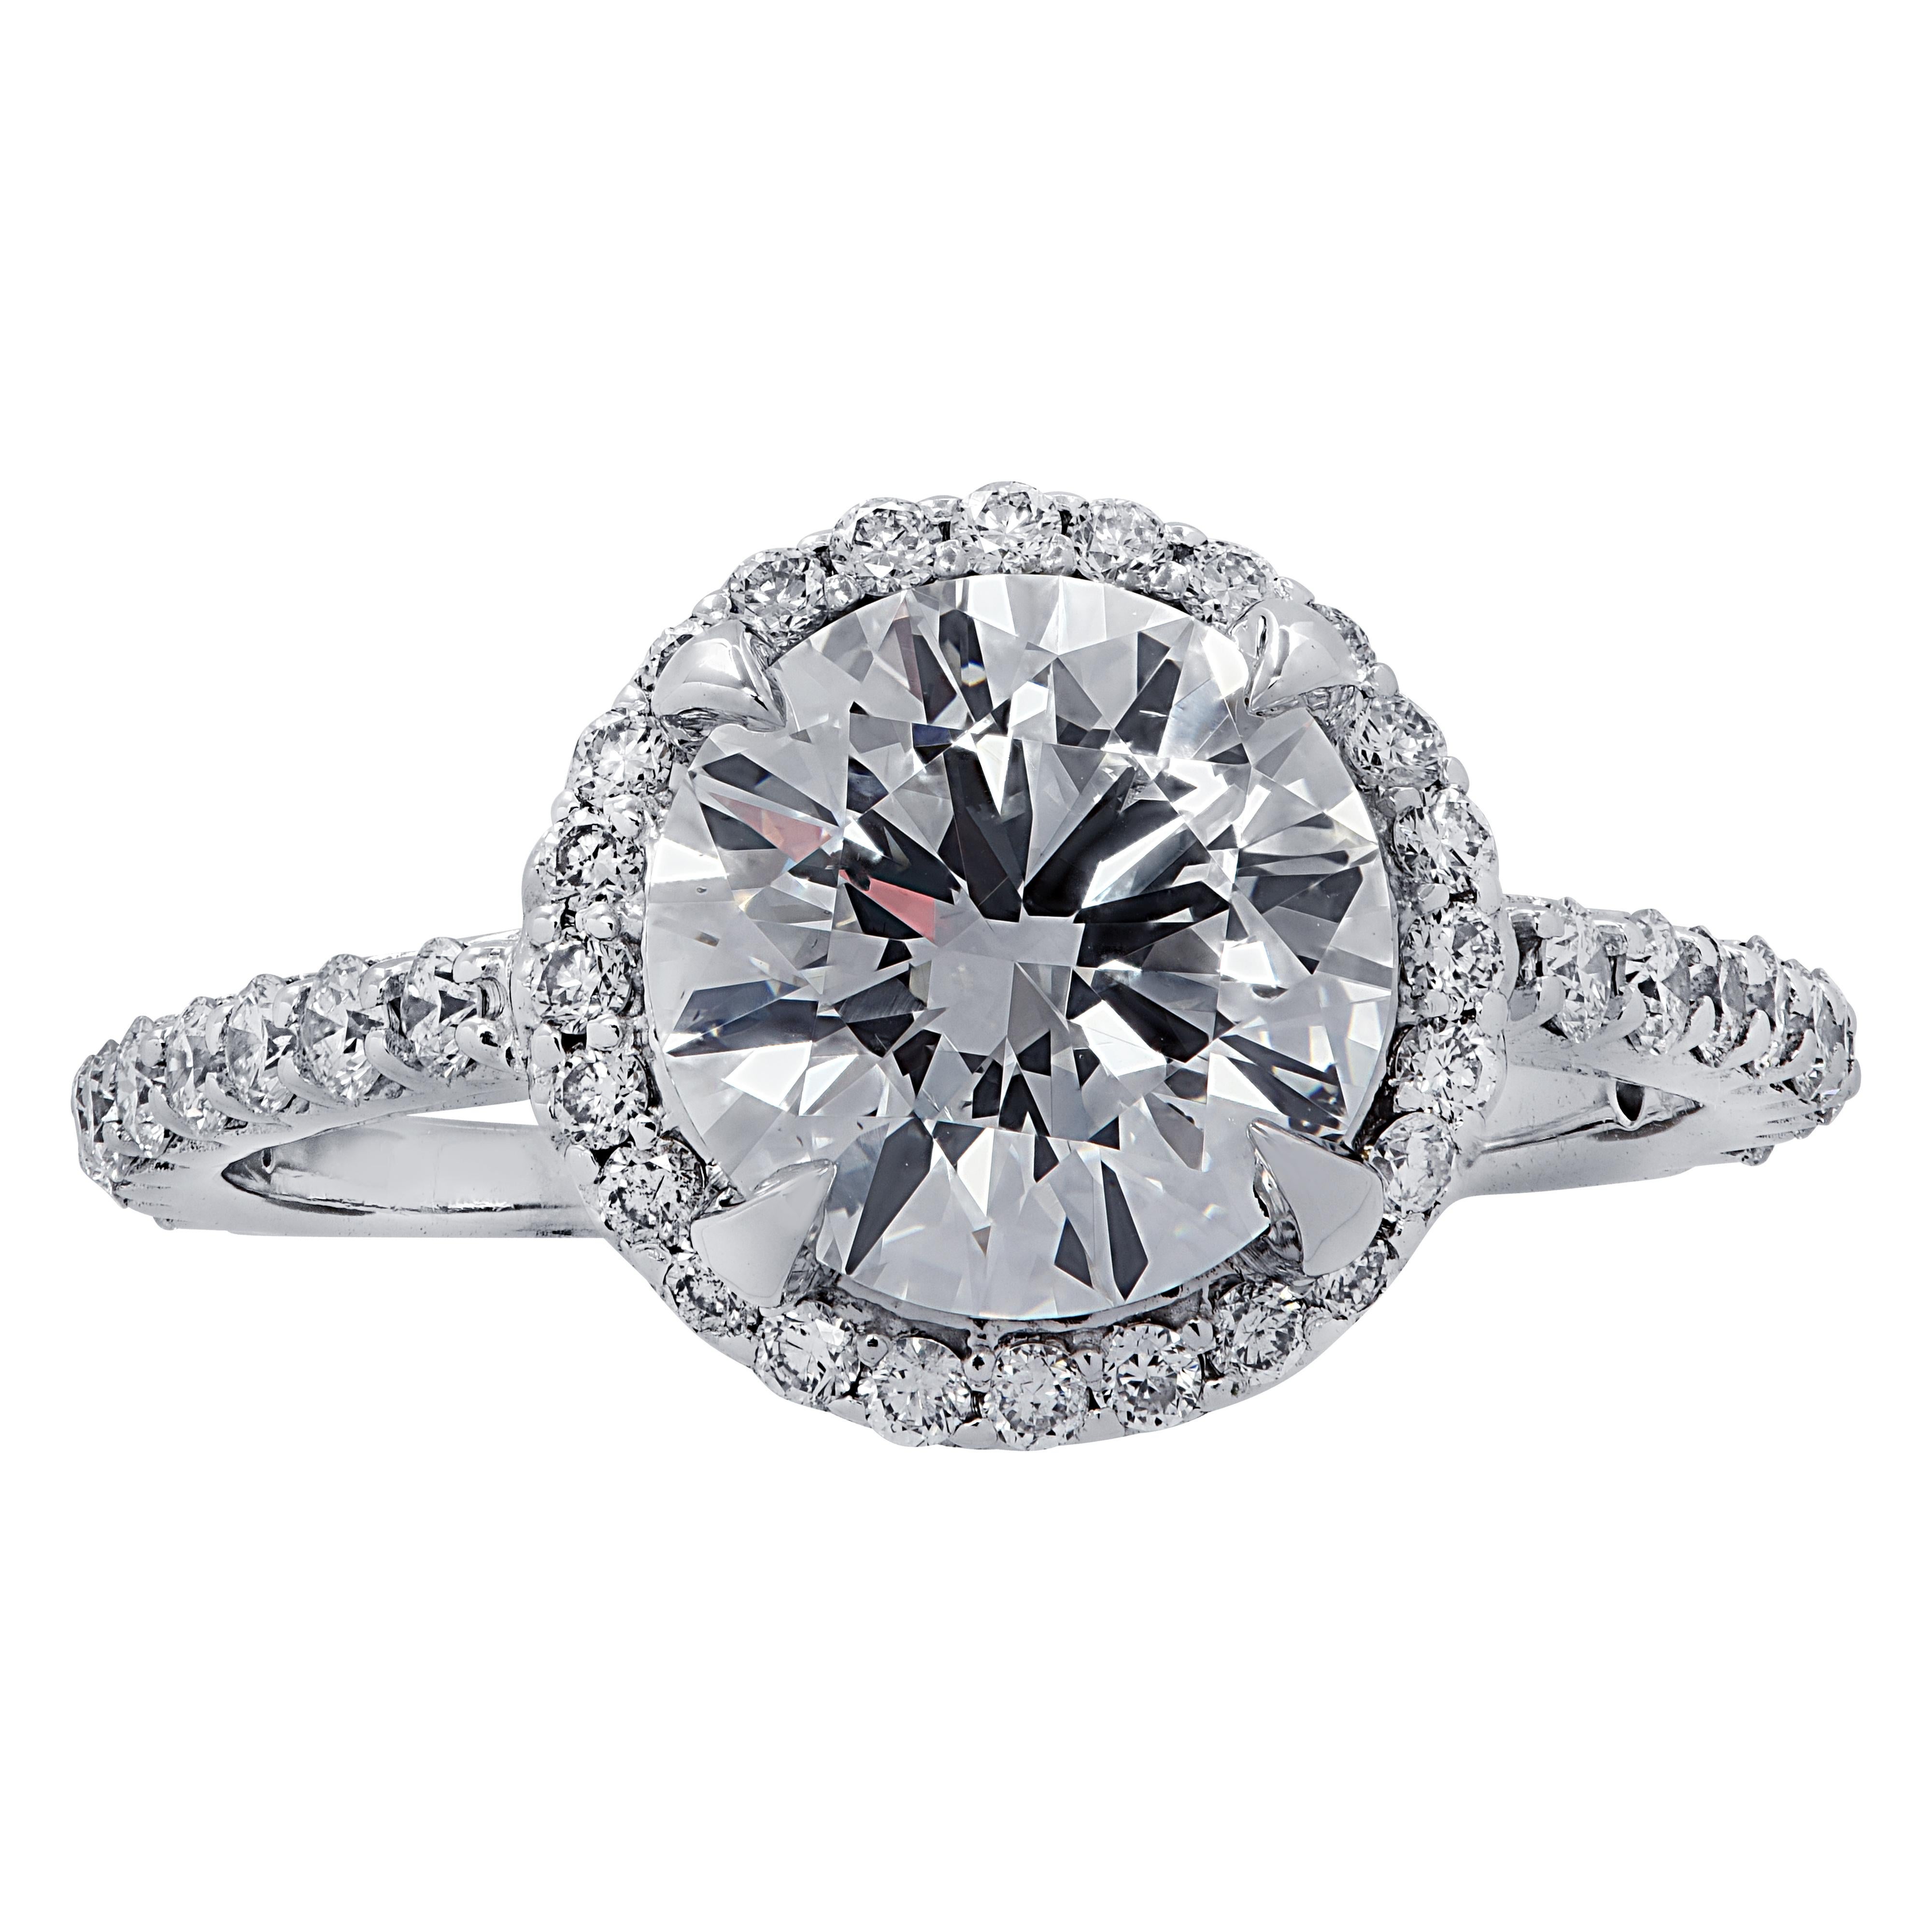 Stunning diamond halo engagement ring crafted in white gold. The ring features an 1.74 carat round brilliant cut diamond graded E color and SI1 clarity by the GIA. The center diamond is accented by 42 round brilliant cut diamonds weighing .50  carat